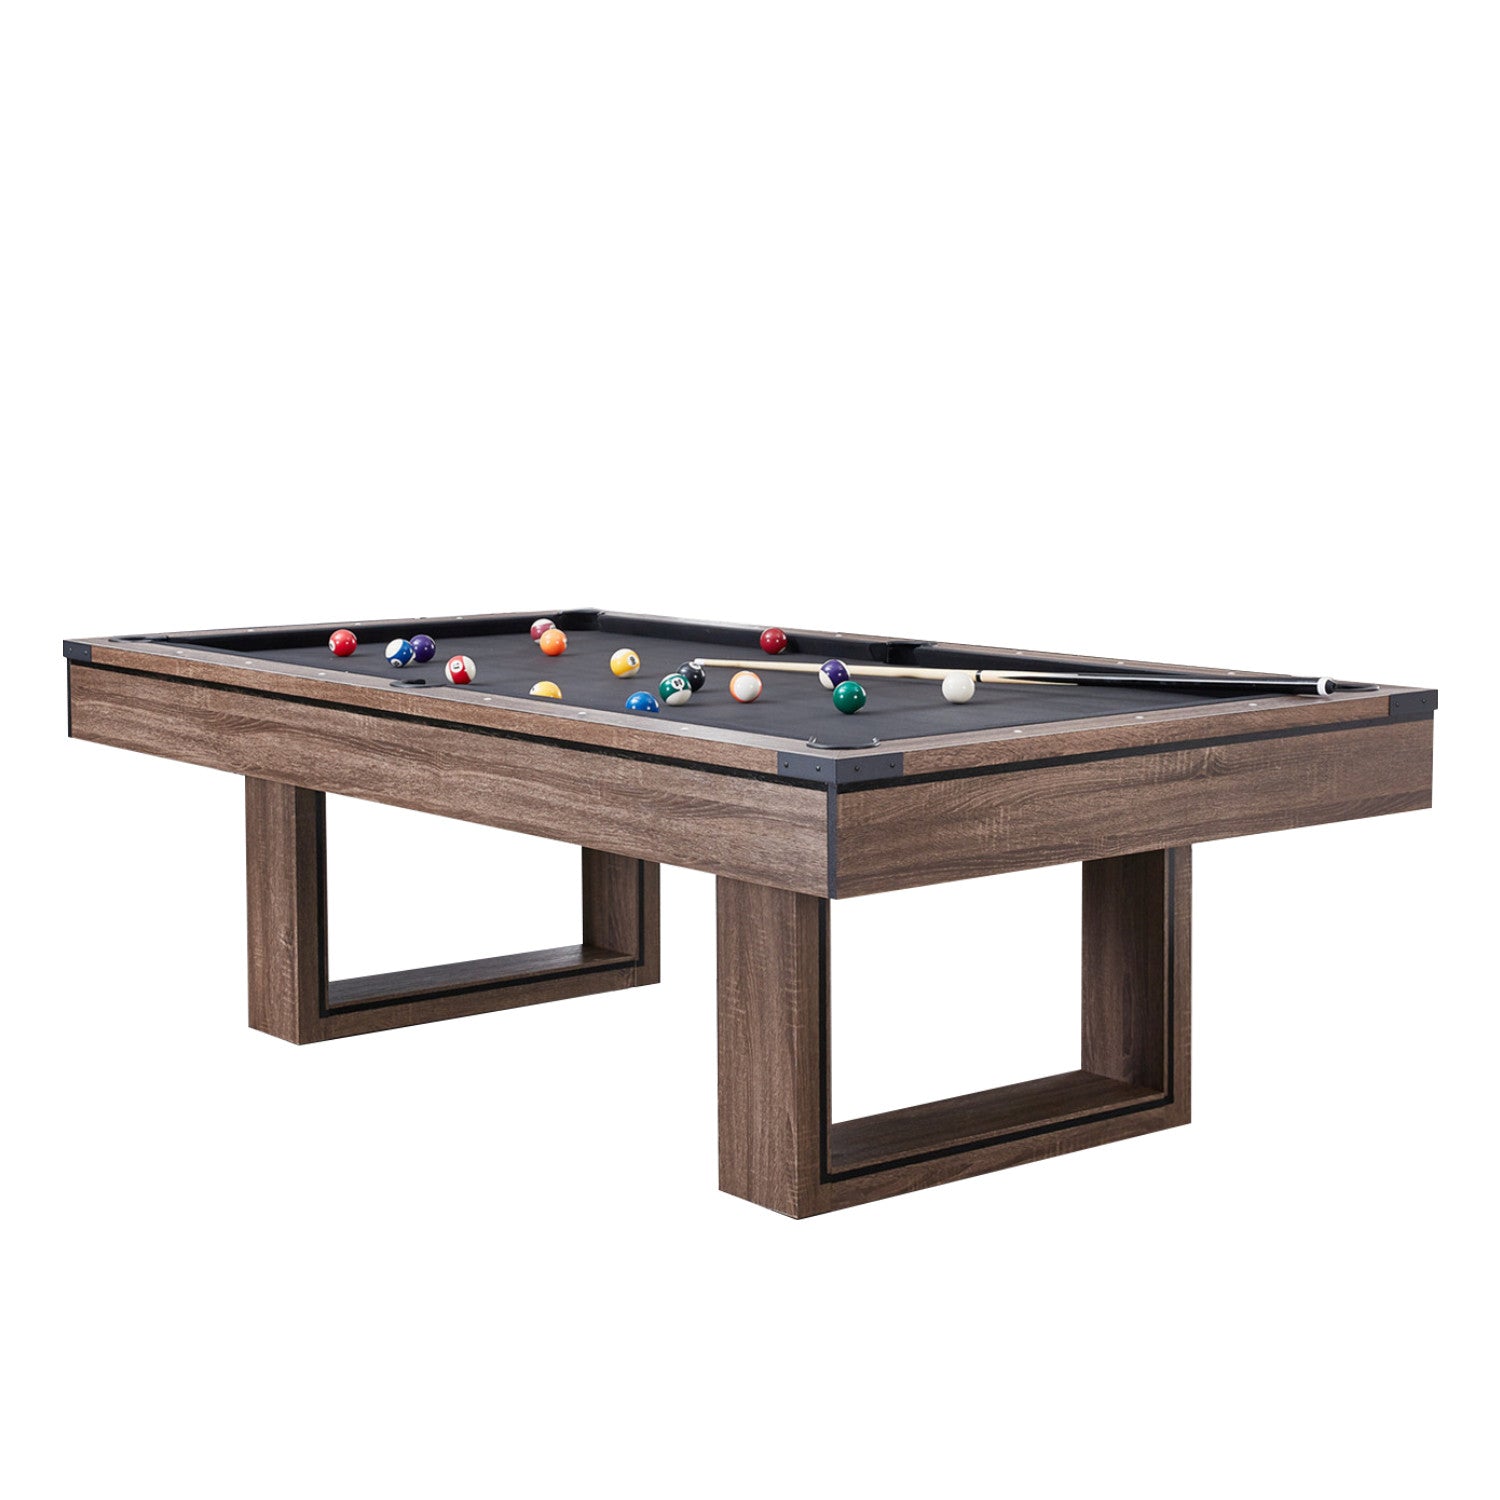 Ocala Dining Pool Table-8FT 3IN1